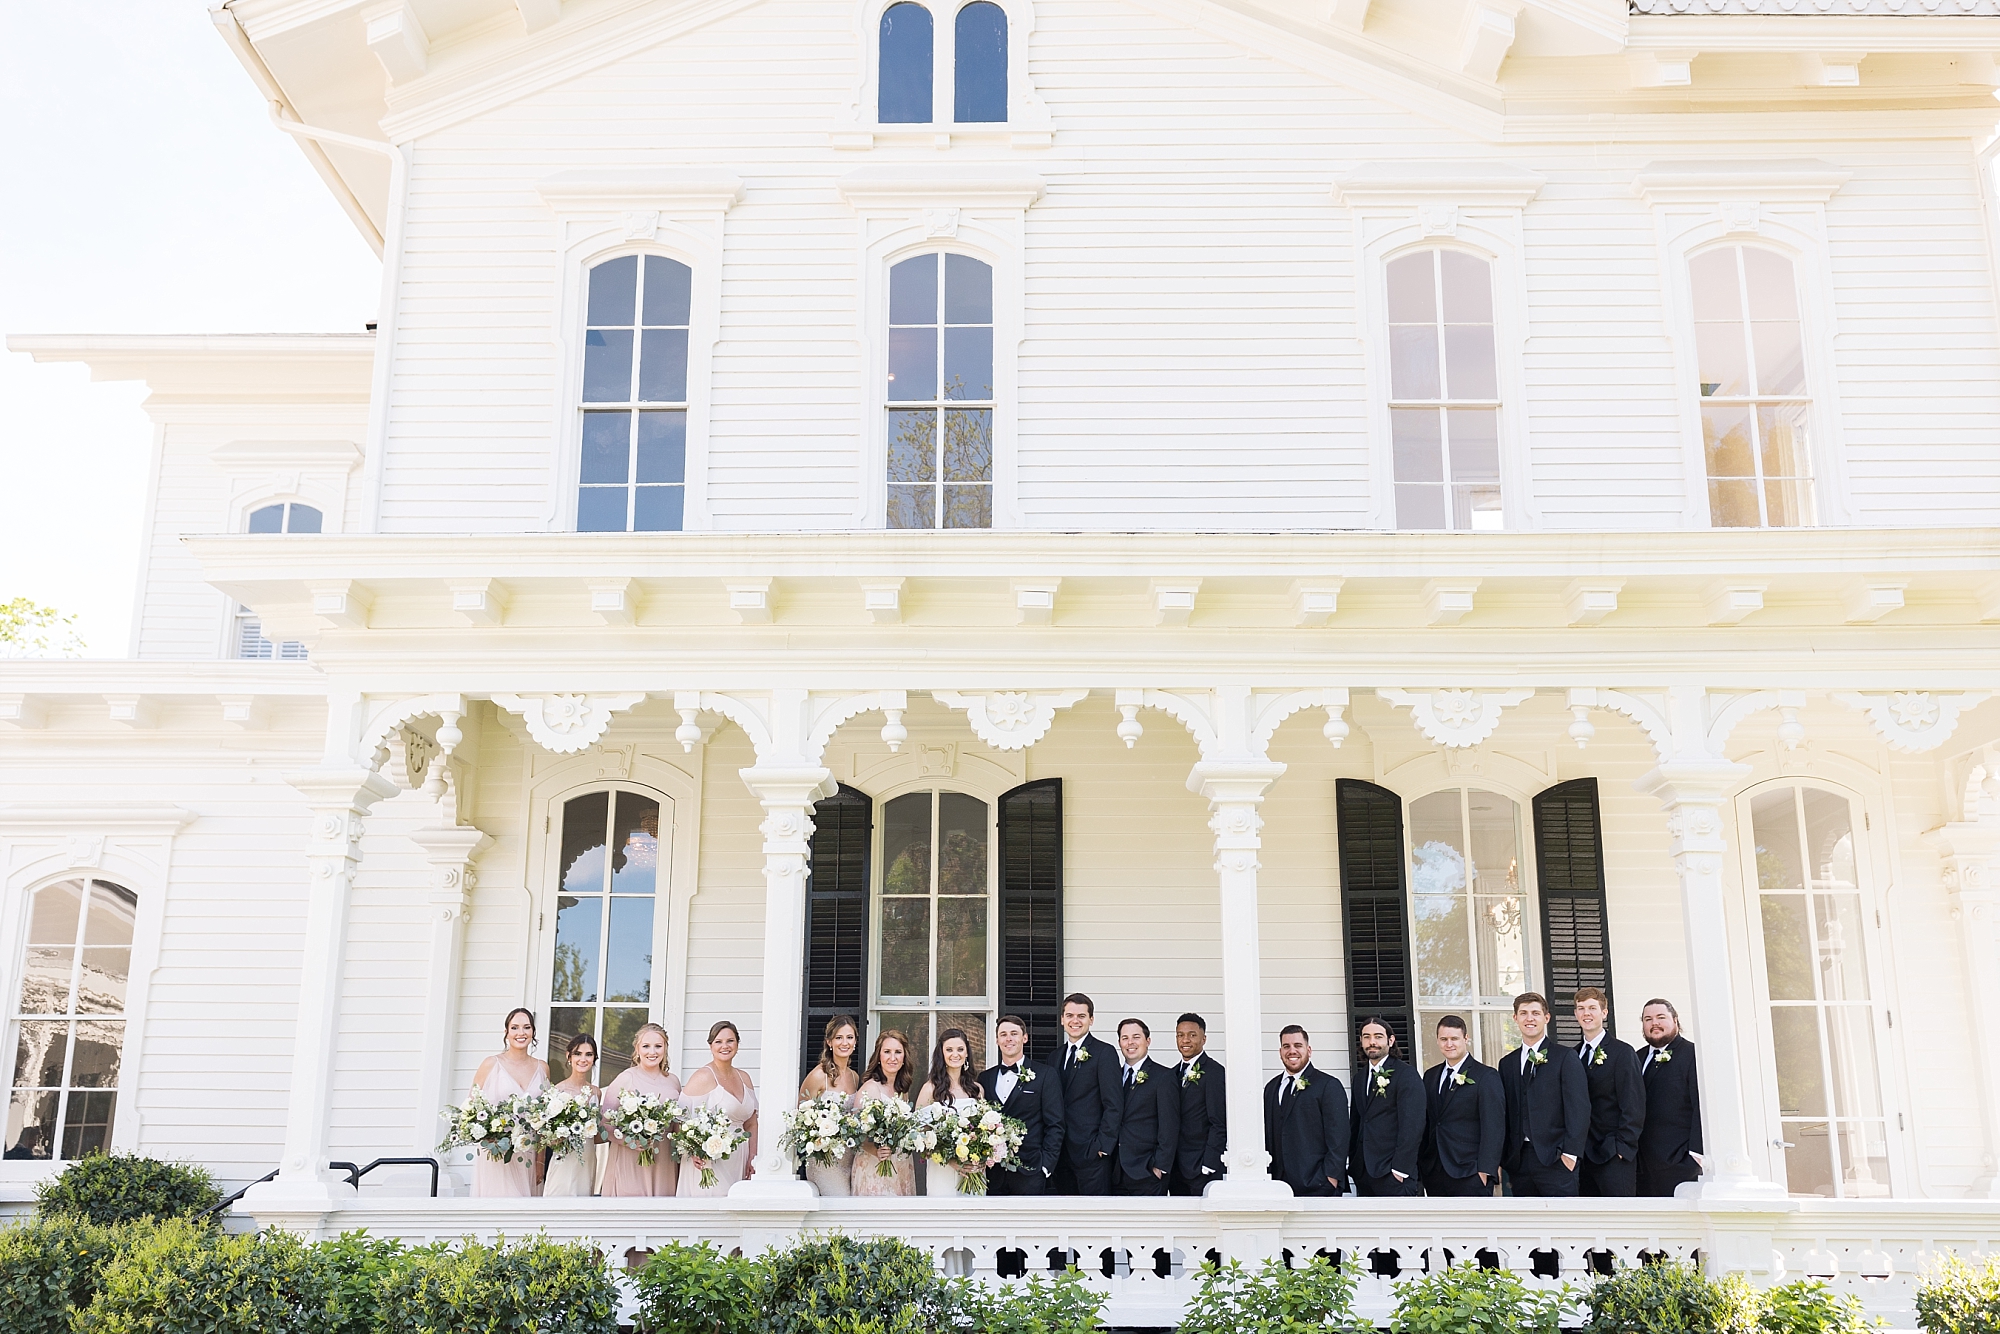 Bridal party photos at a classic southern home in Raleigh  | Merrimon Wynne Wedding | Sarah Hinckley Photography | Raleigh NC Wedding Photographer